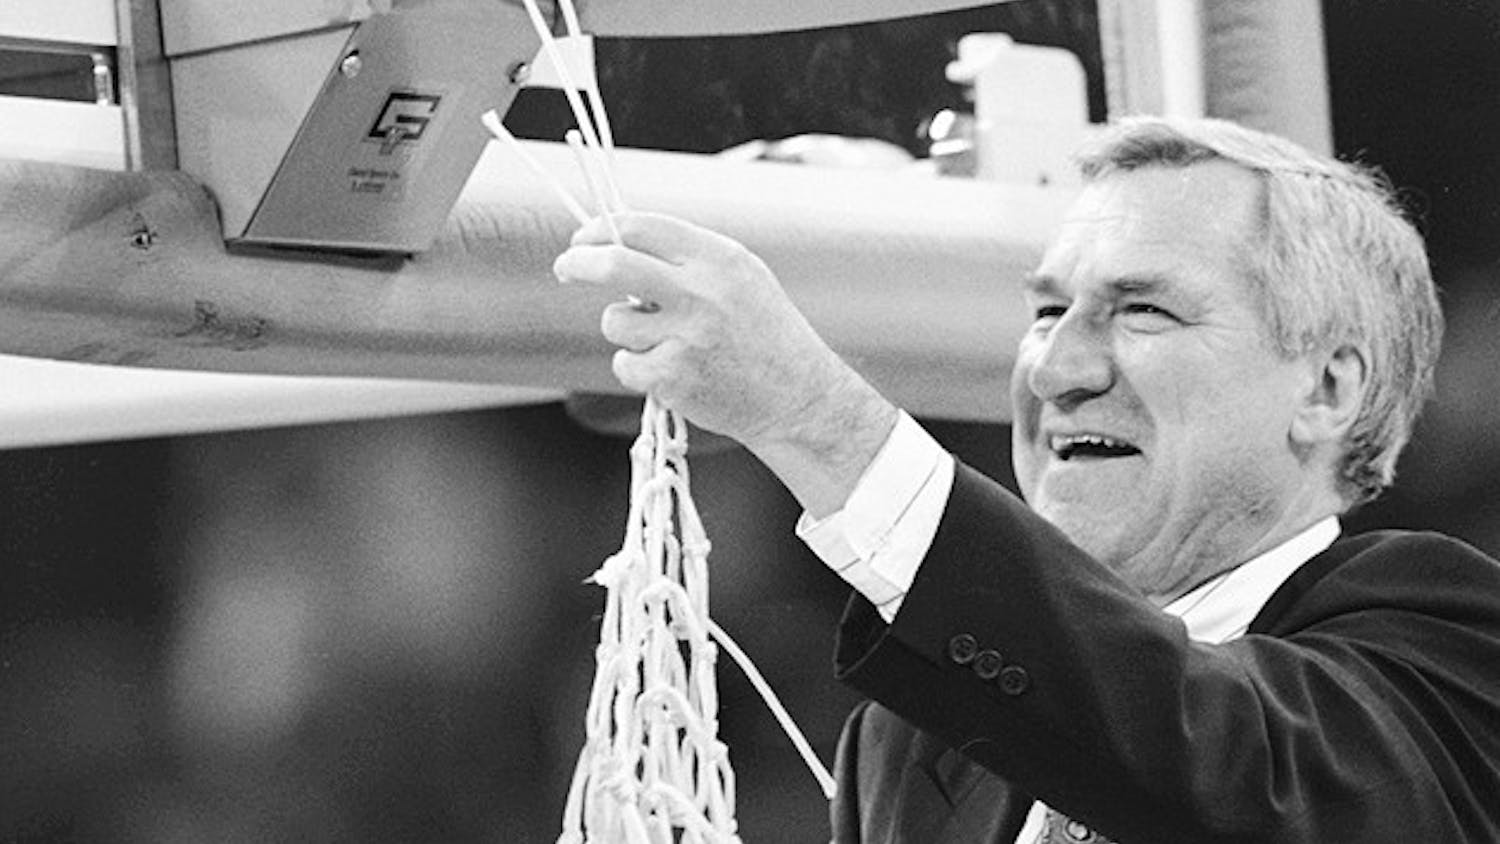 	Previous Head Coach Dean Smith cuts down the net at the UNC vs. Michigan NCAA championship game in New Orleans, L.A. in 1993. 

	Photo Courtesy of North Carolina Collection, UNC-CH